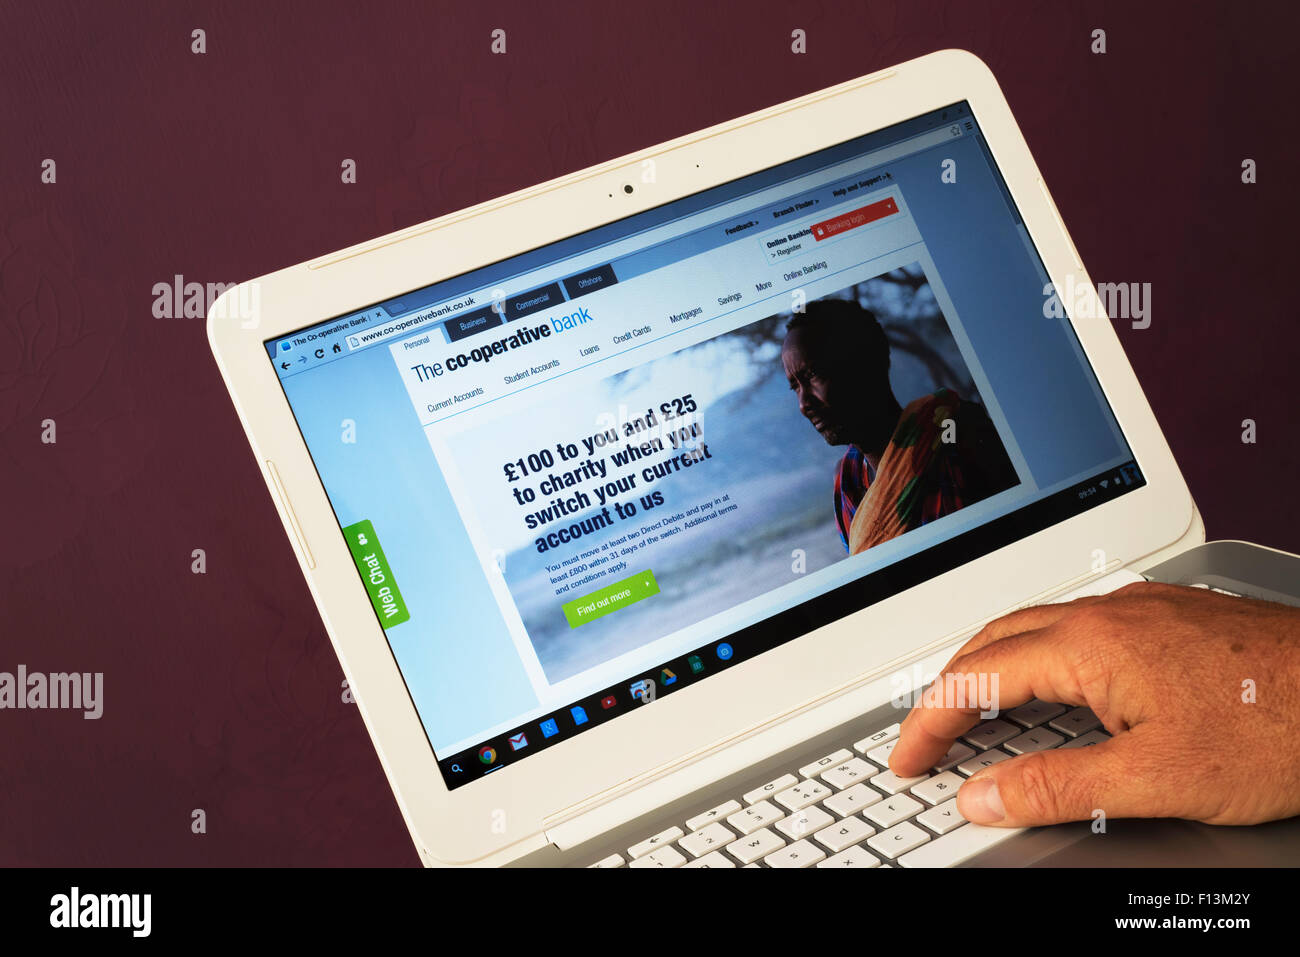 Website belonging to The Co-Operative Bank being viewed on a laptop computer Stock Photo